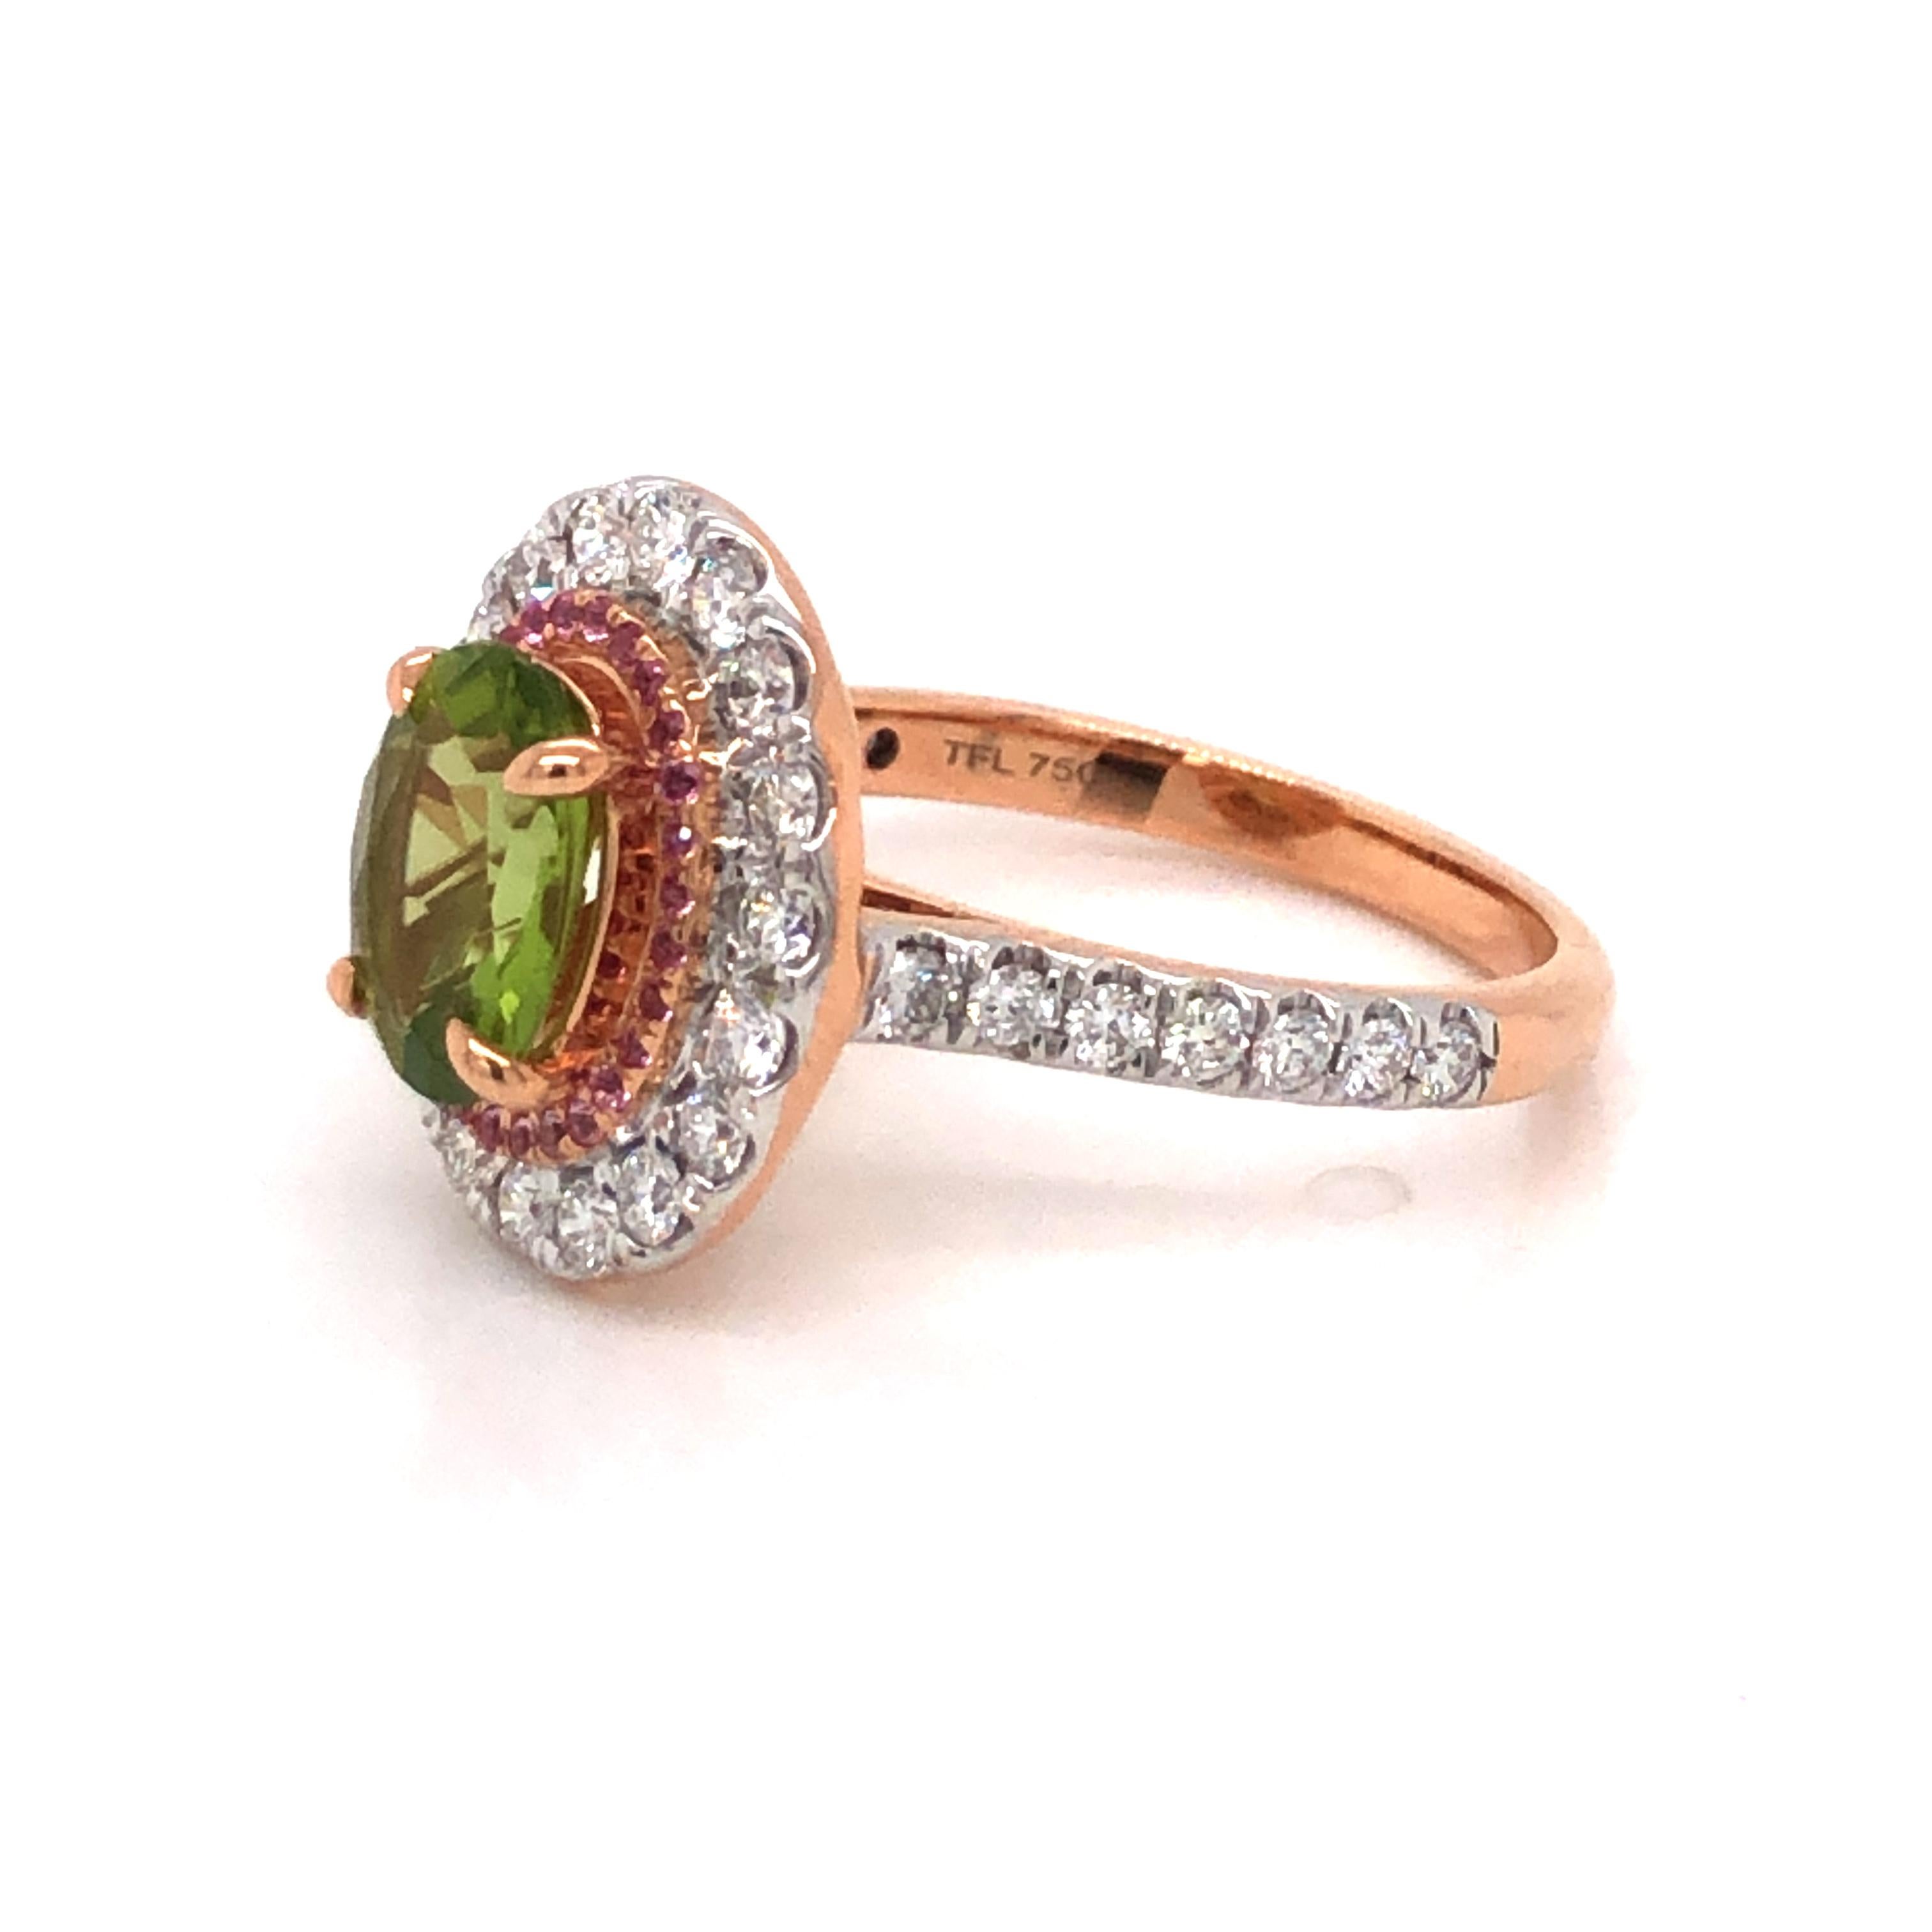 2.5 Carat Green Peridot Pink Sapphire Diamond Engagement Cocktail 18KT Ring For Sale 4